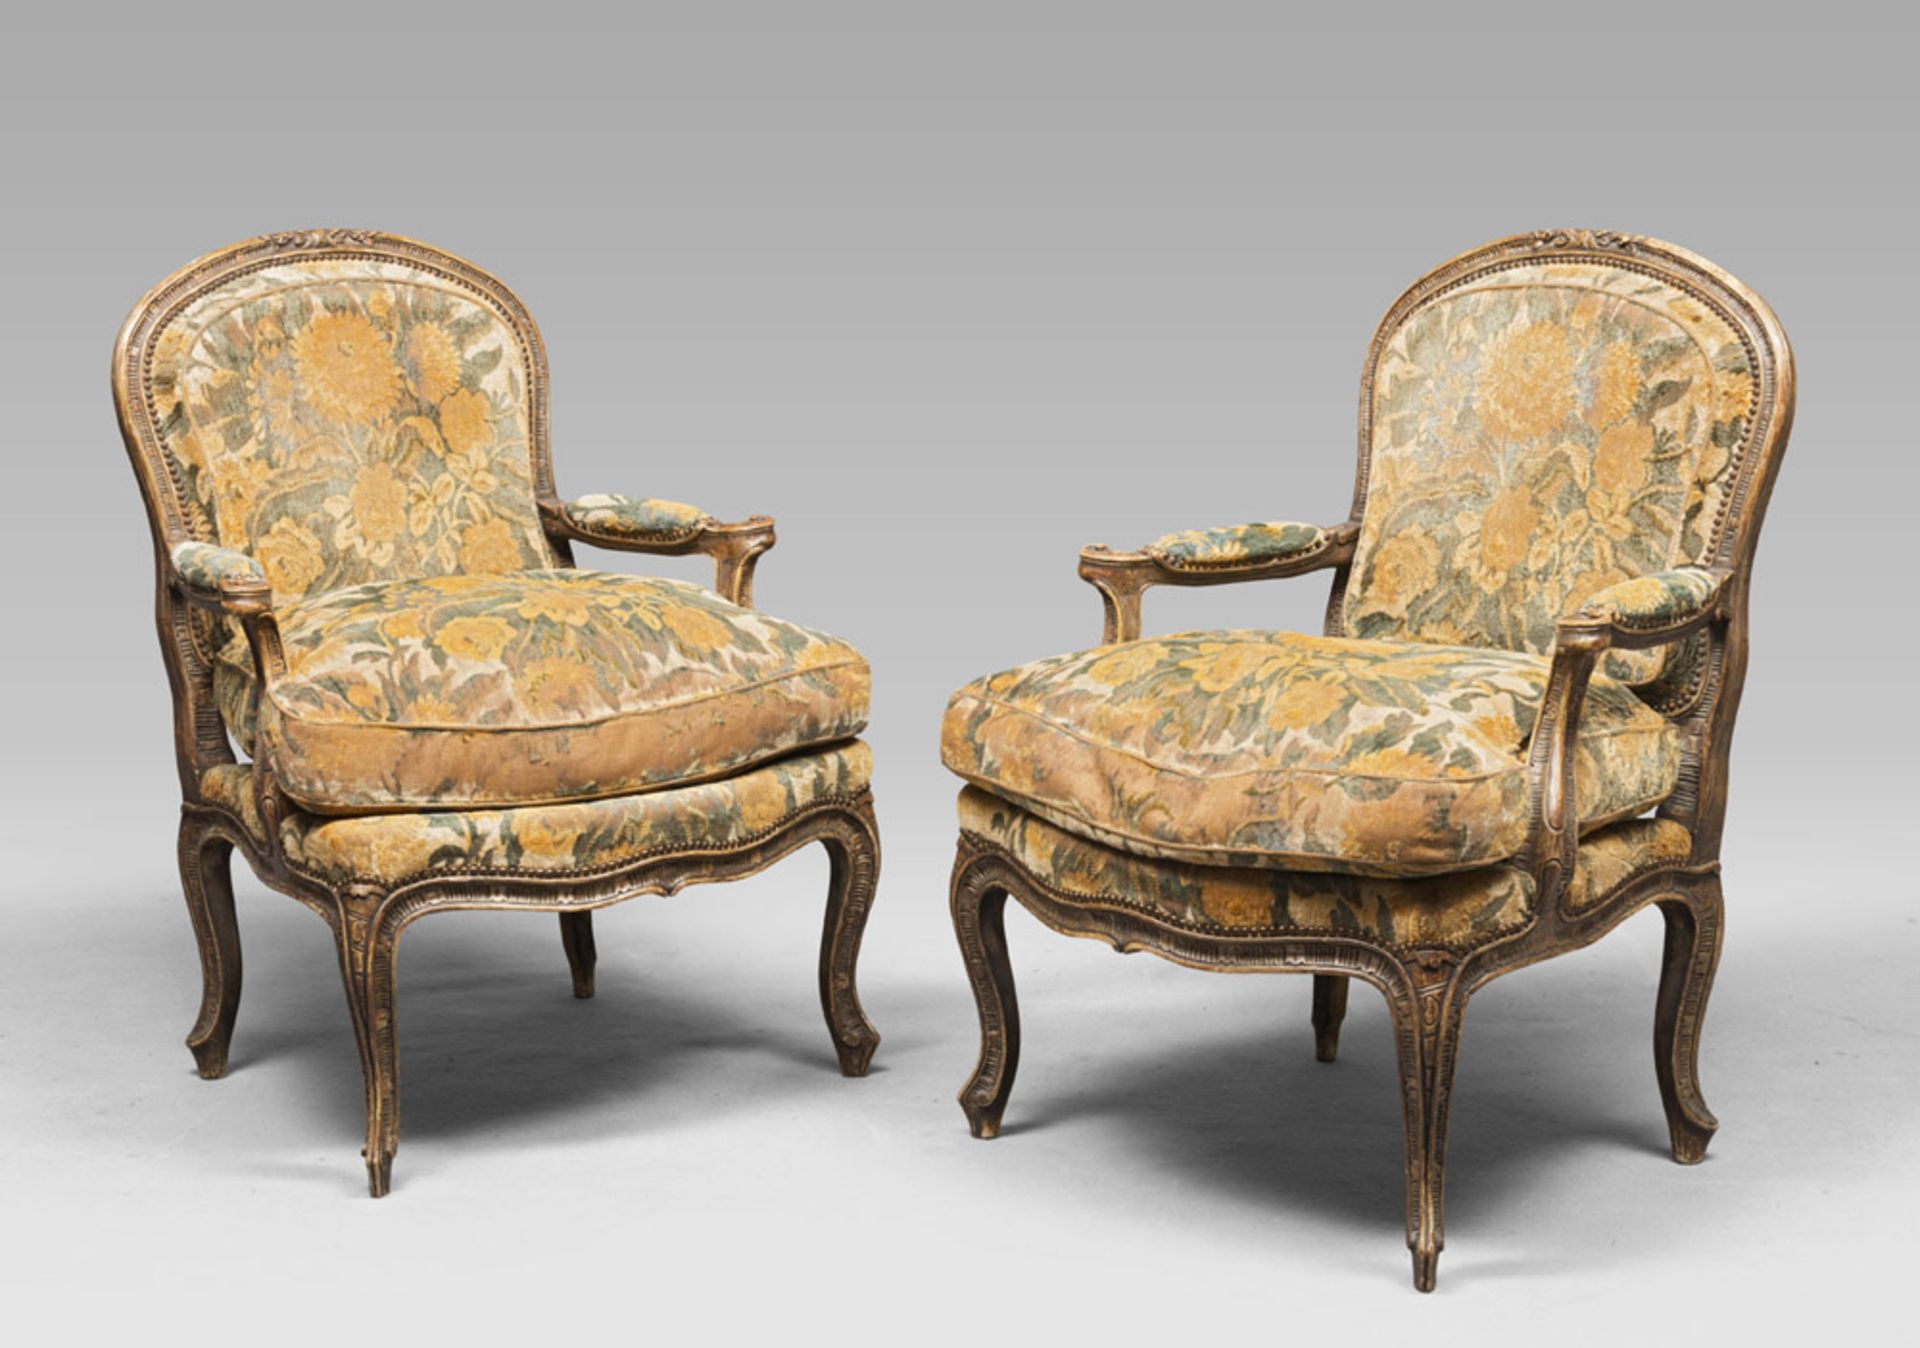 A pair of decolled wooden armchairs and velvet upholstery, probably Venice 18th century.